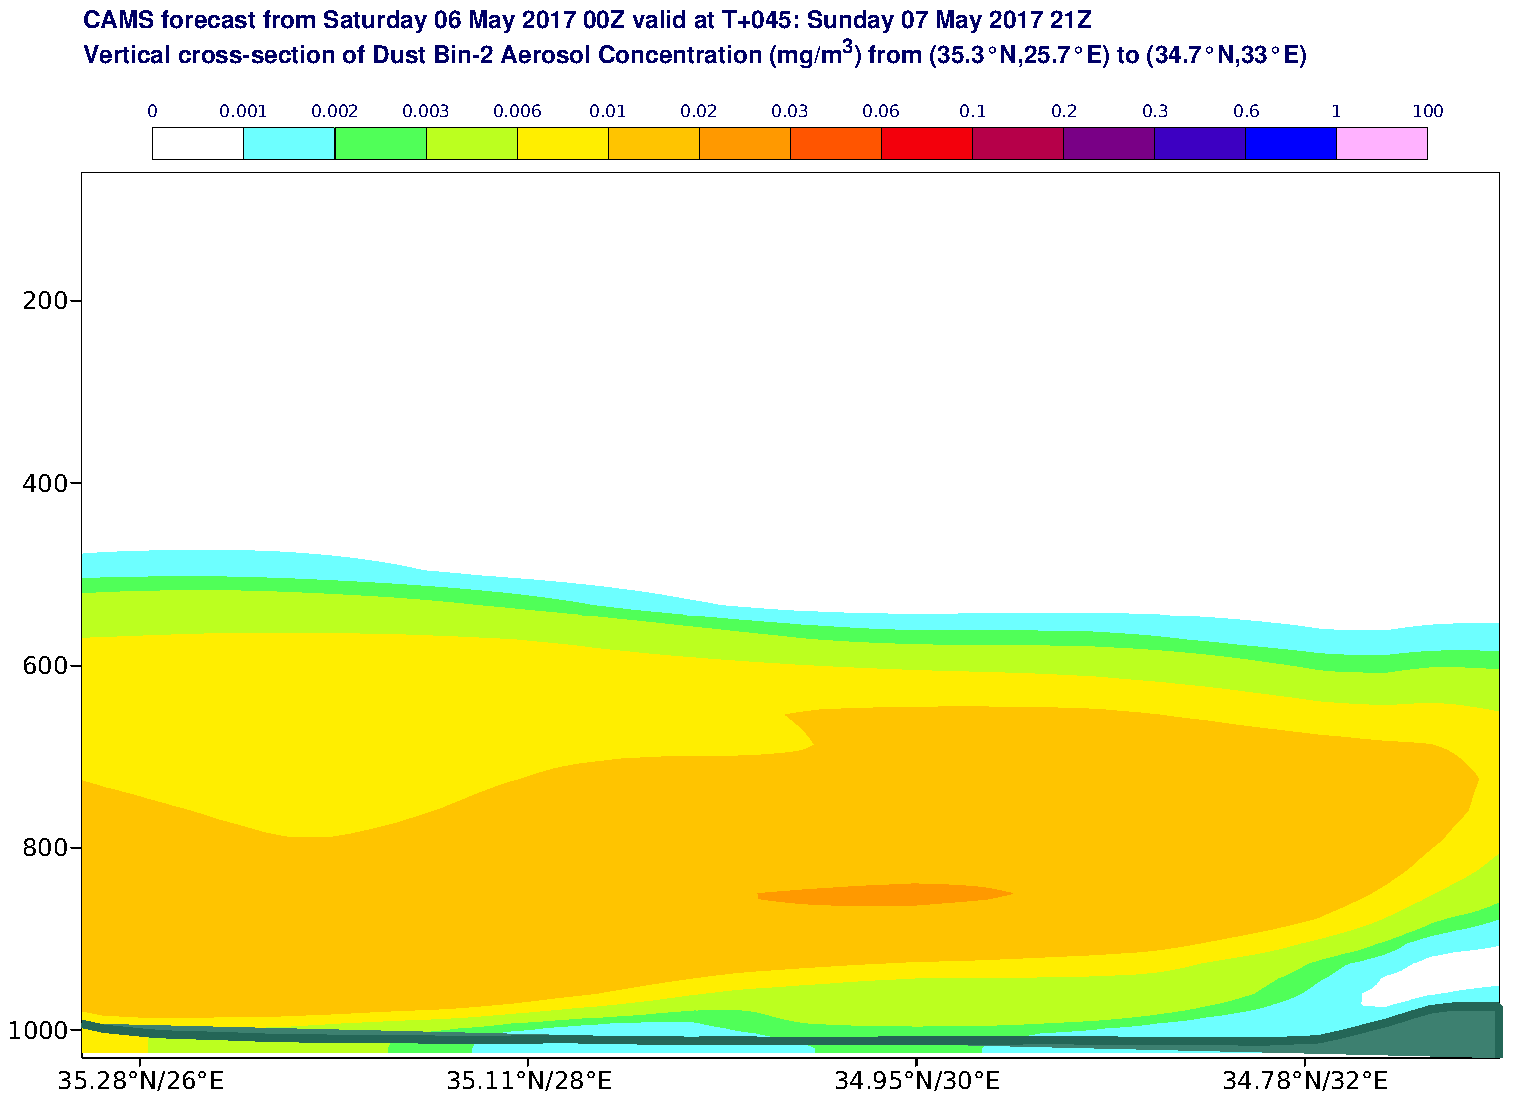 Vertical cross-section of Dust Bin-2 Aerosol Concentration (mg/m3) valid at T45 - 2017-05-07 21:00